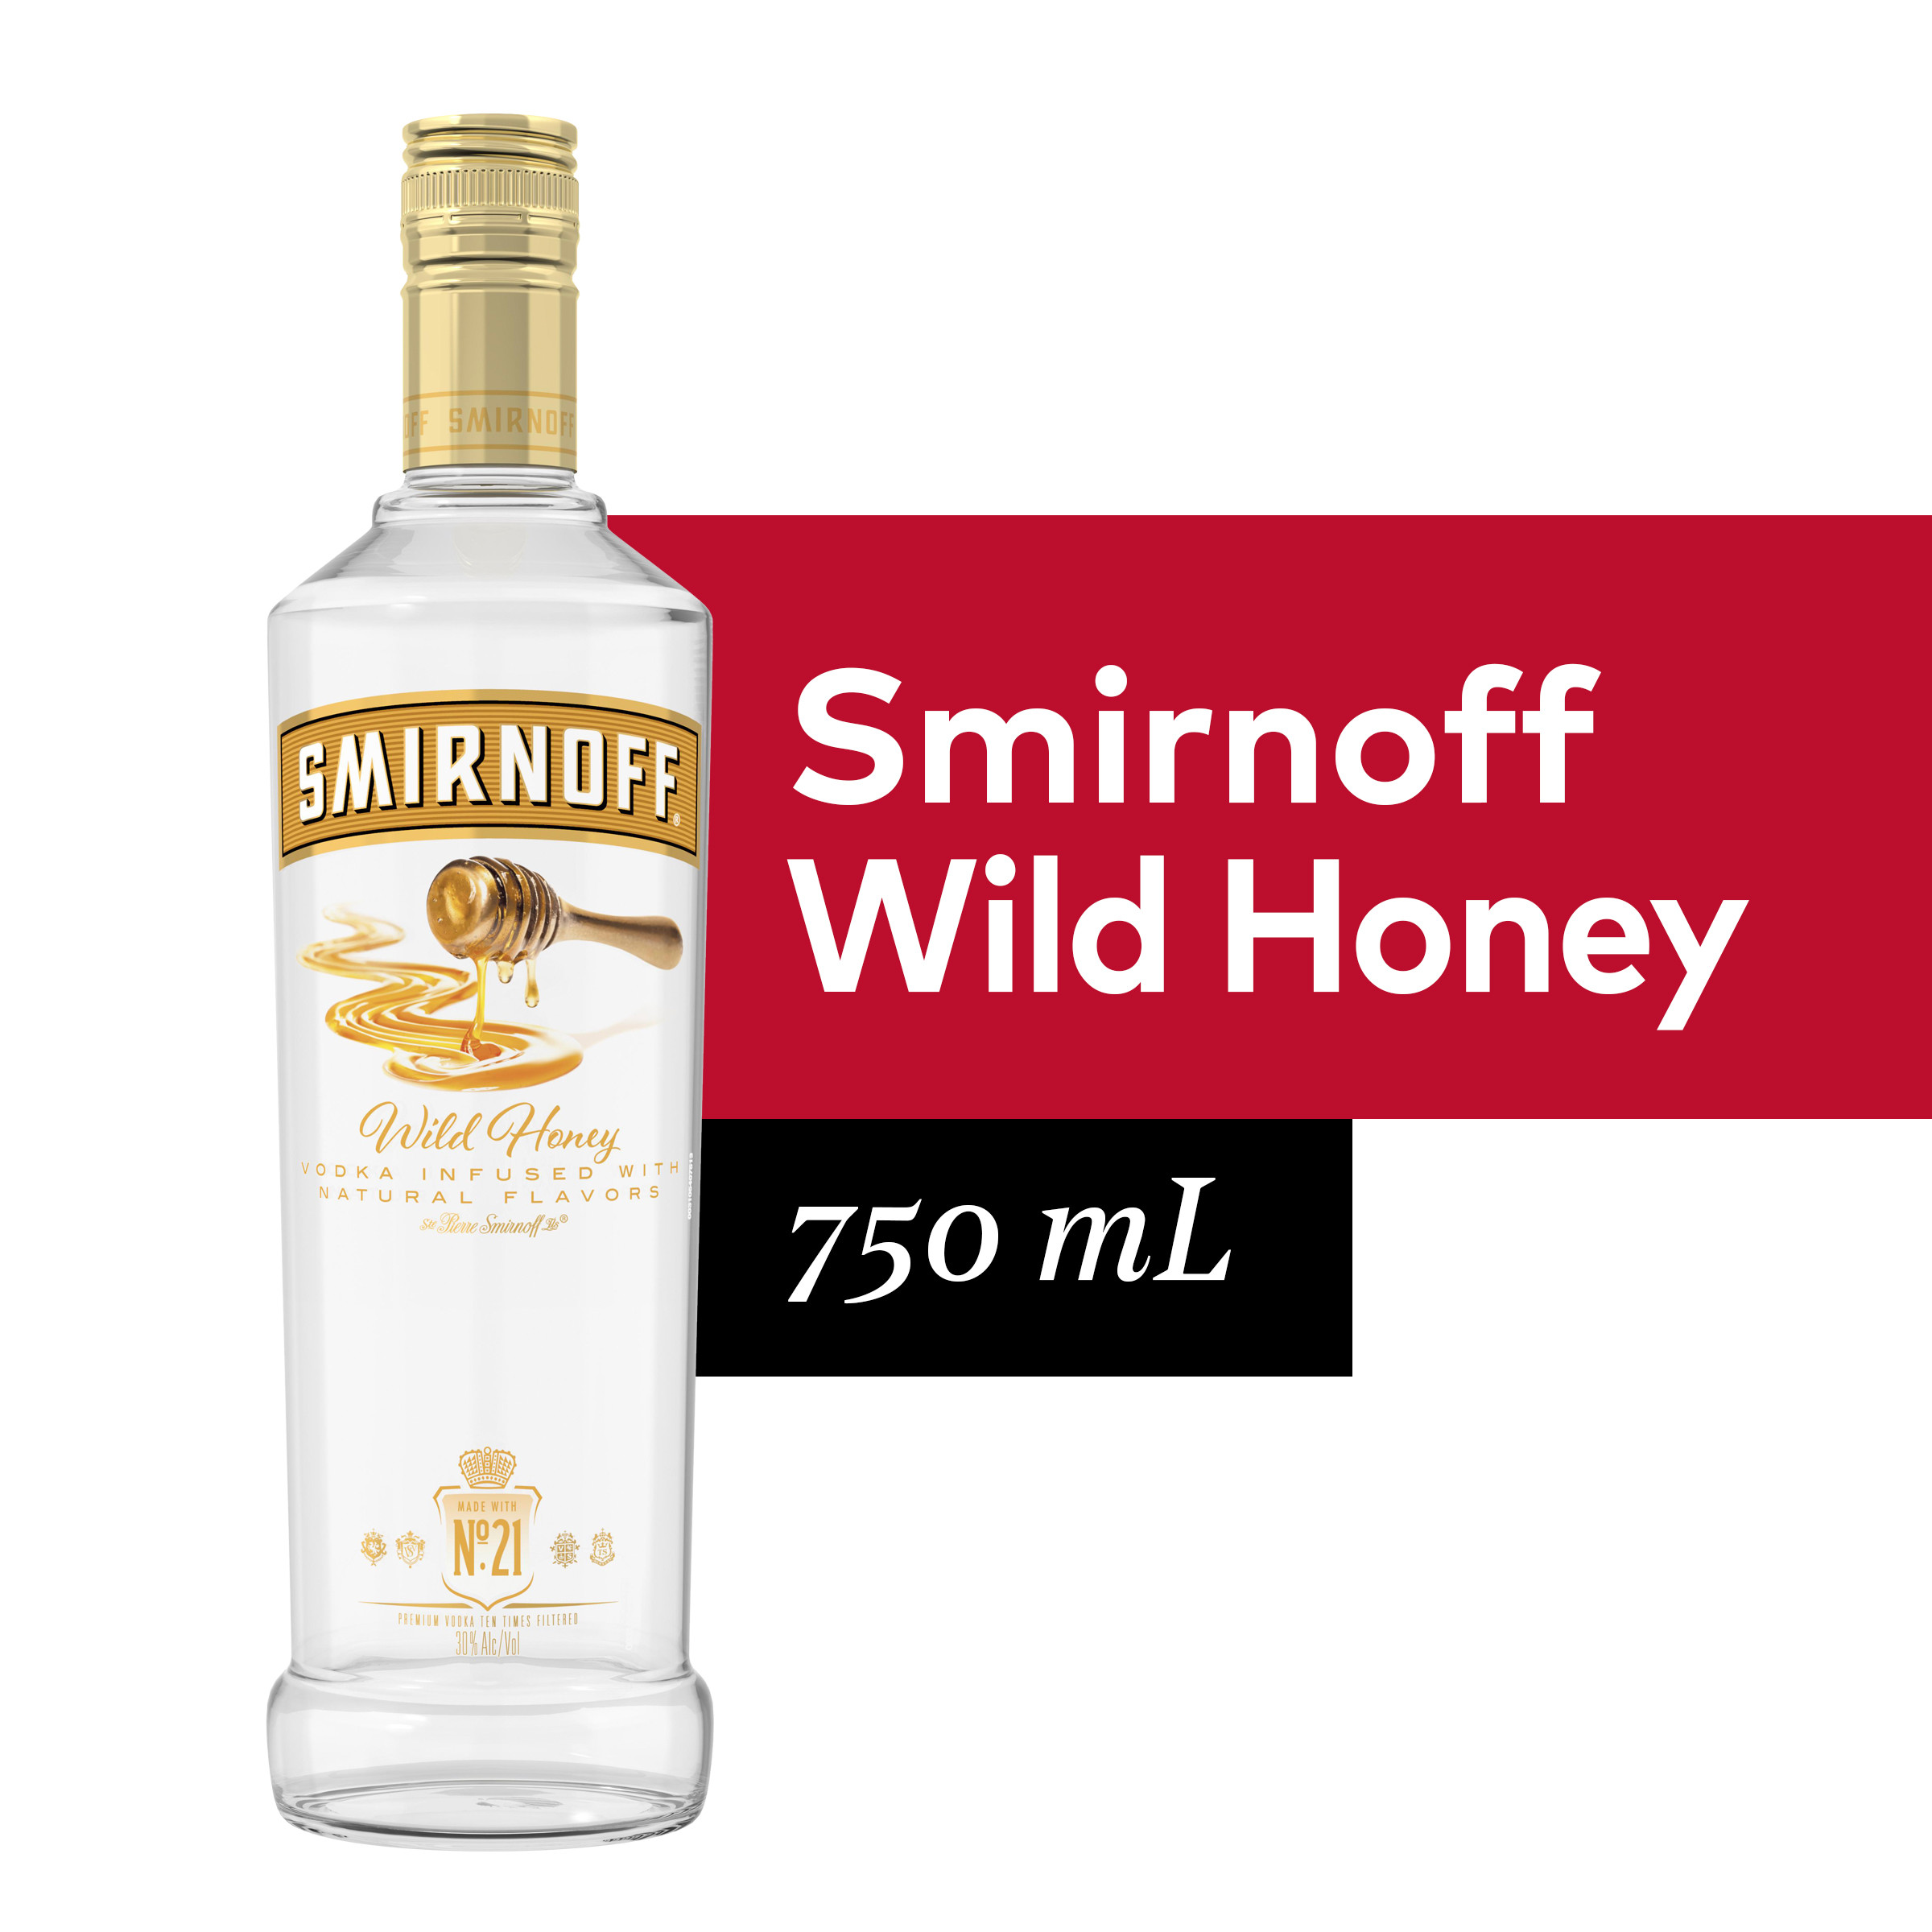 Smirnoff Wild Honey (Vodka Infused With Natural Flavors)